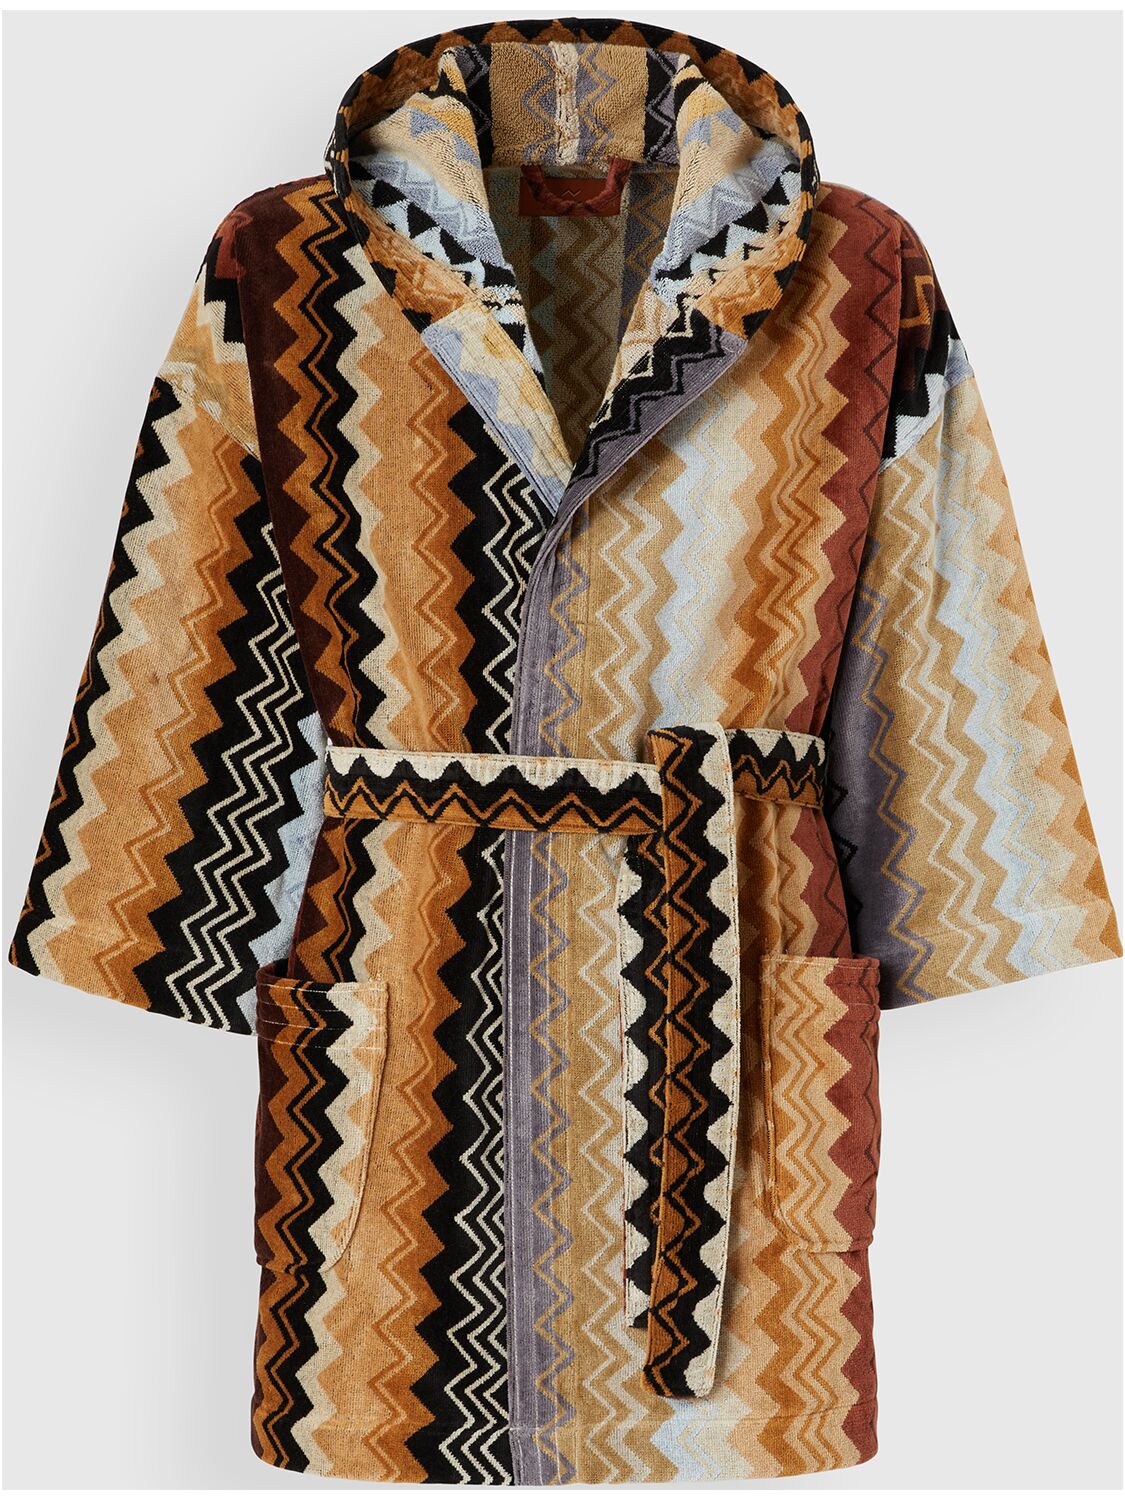 Missoni Home Collection Giacomo Hooded Short Bathrobe In Brown